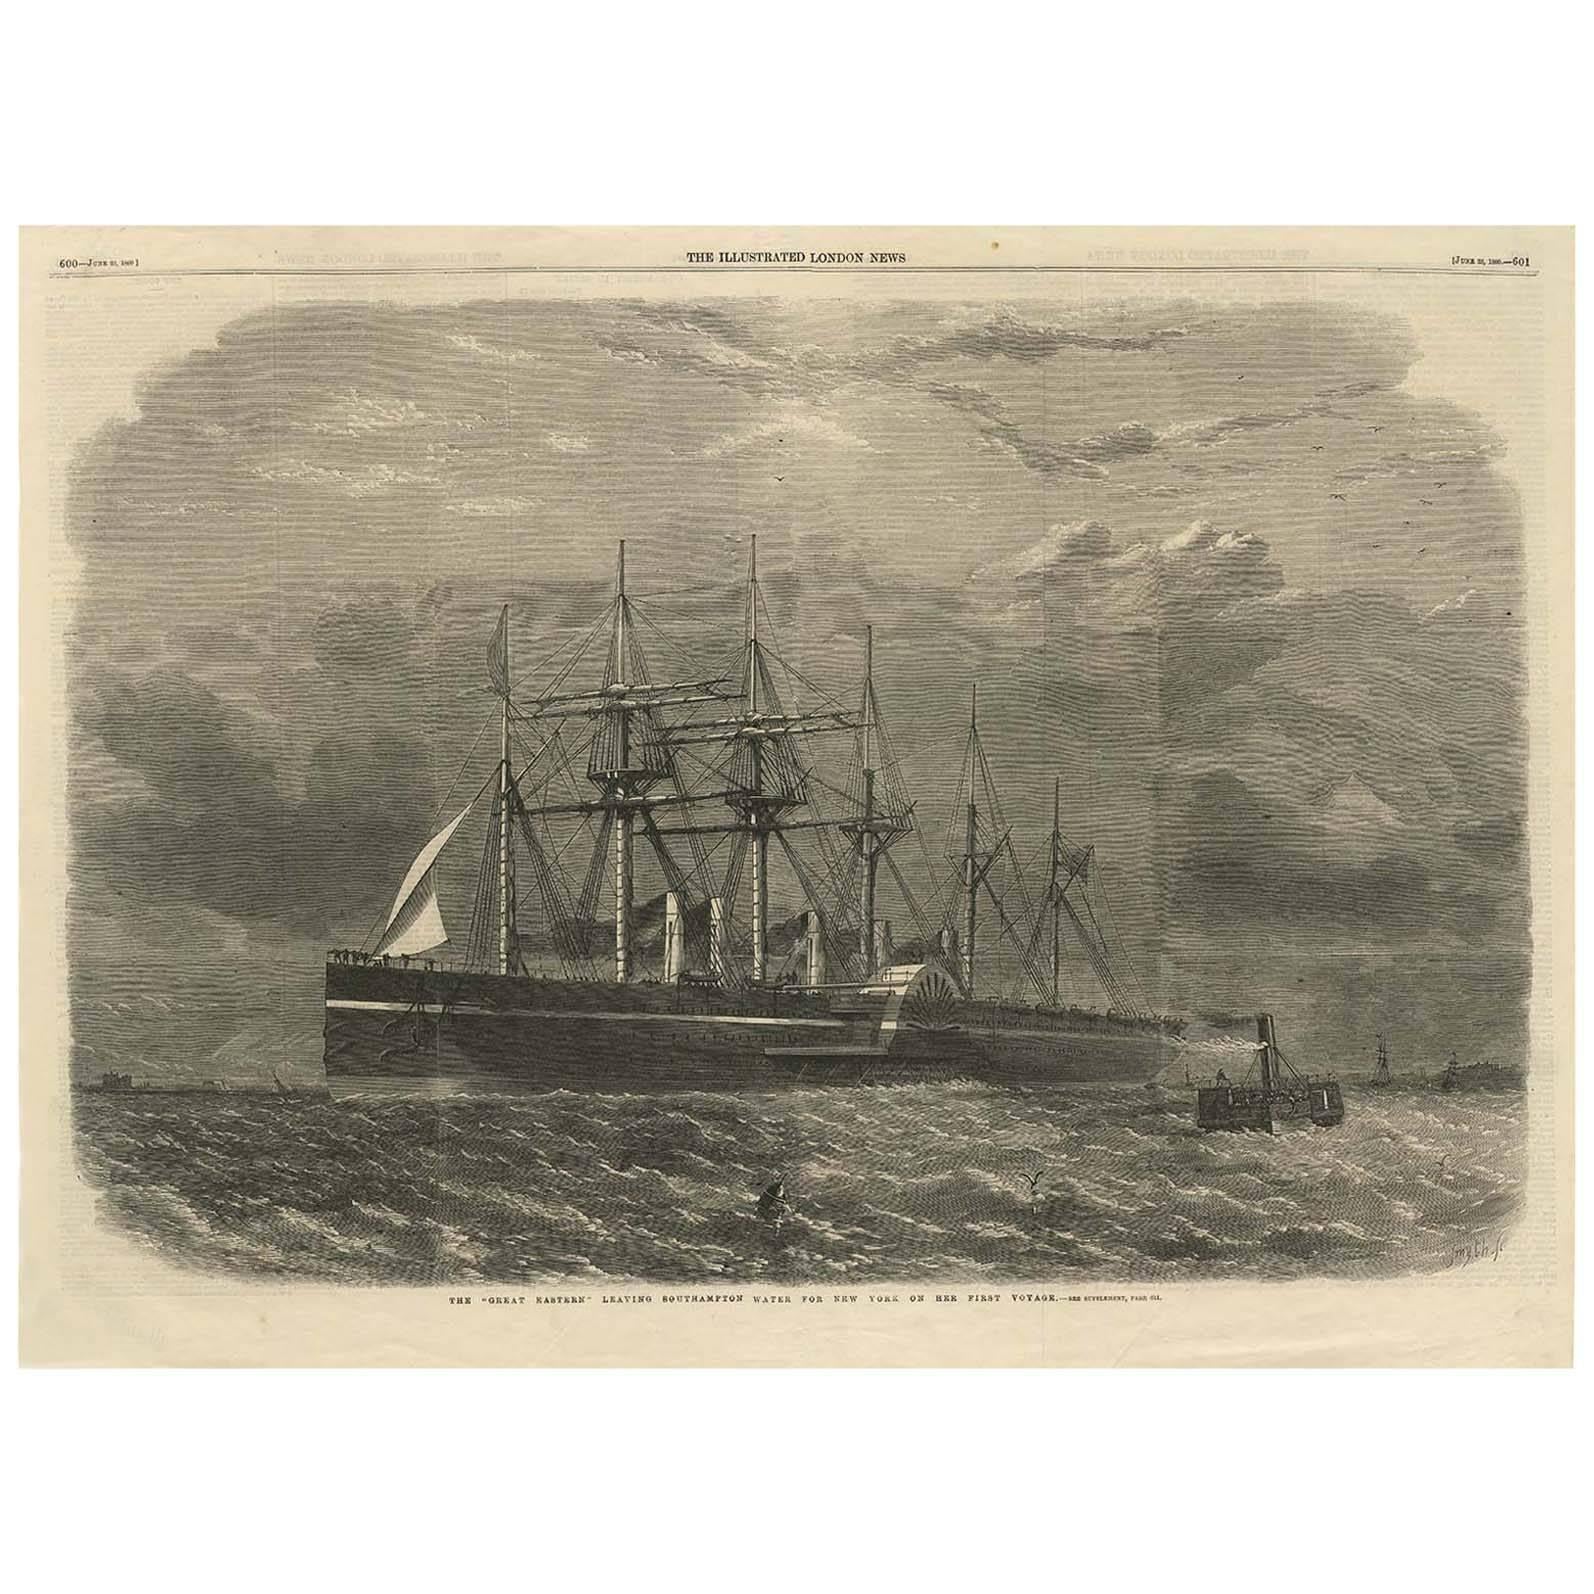 Impression ancienne du Great Eastern Leaving Southampton Water pour New York, 1860